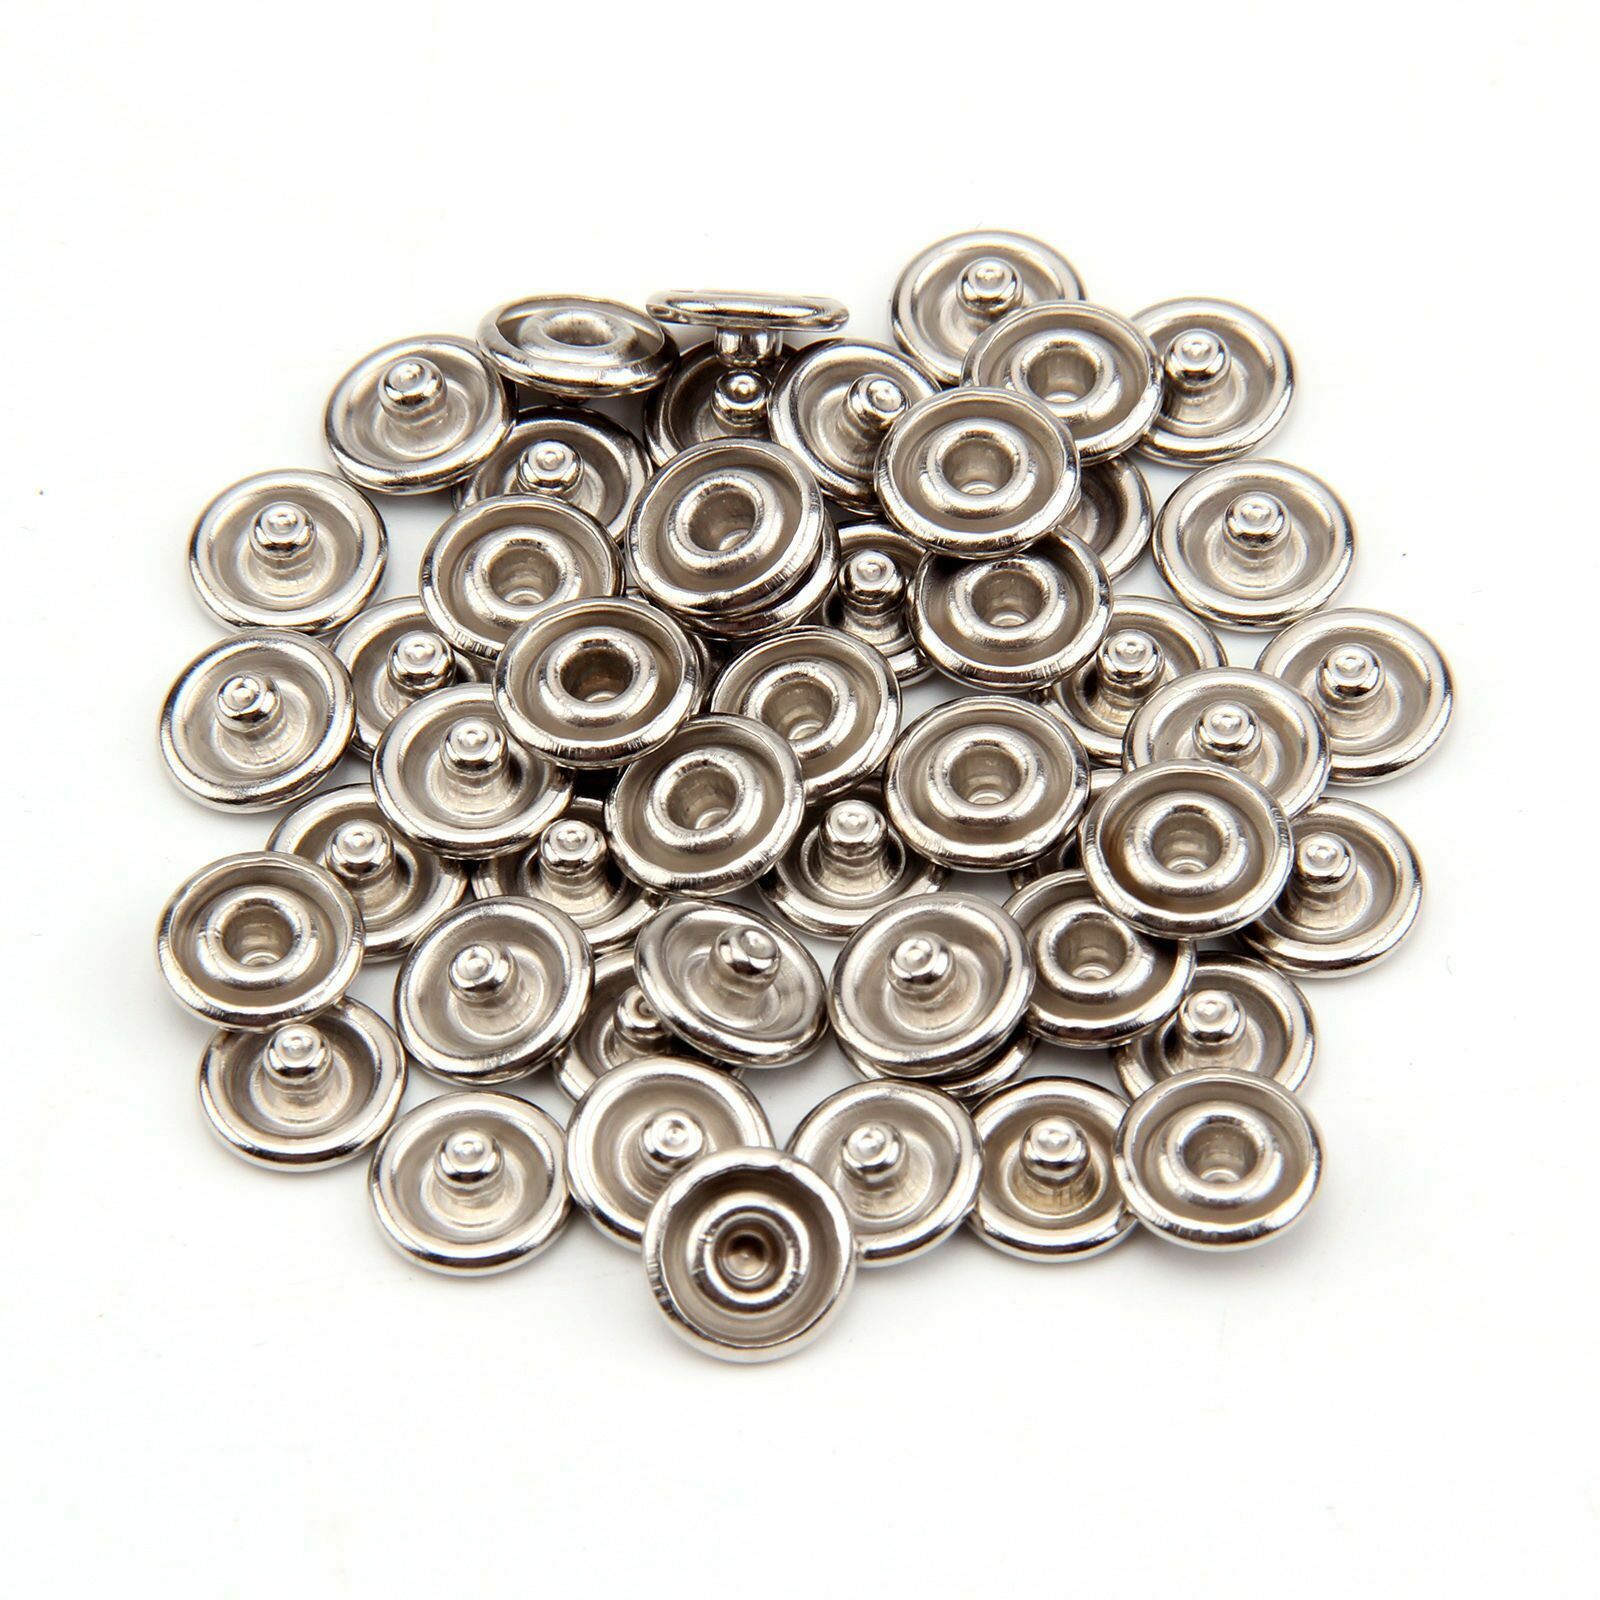 Metal Prong Ring Fasteners Press Studs Poppers 9.5mm 10set White